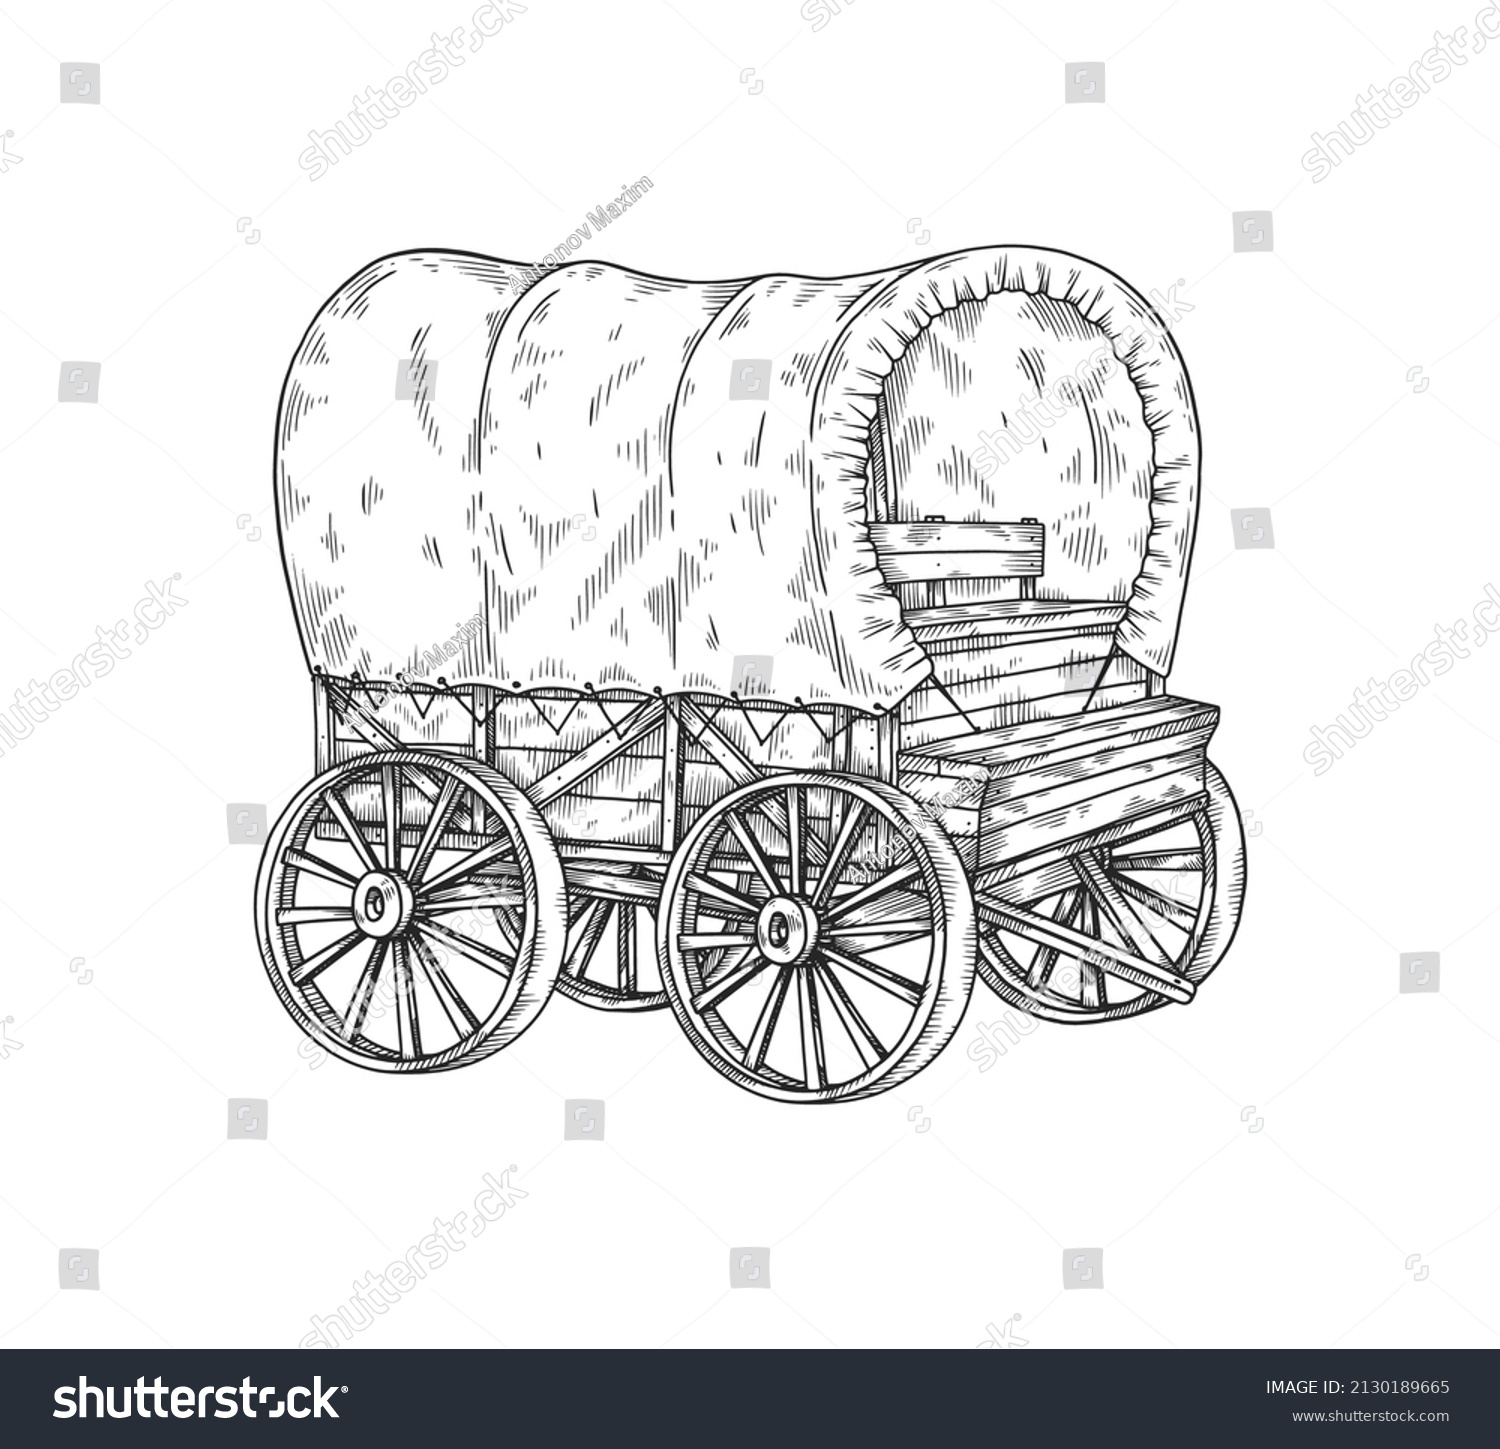 SVG of Vintage horse carriage or wagon, sketch or engraving style vector illustration isolated on white background. Ancient old cart or cab vehicle without horse. svg